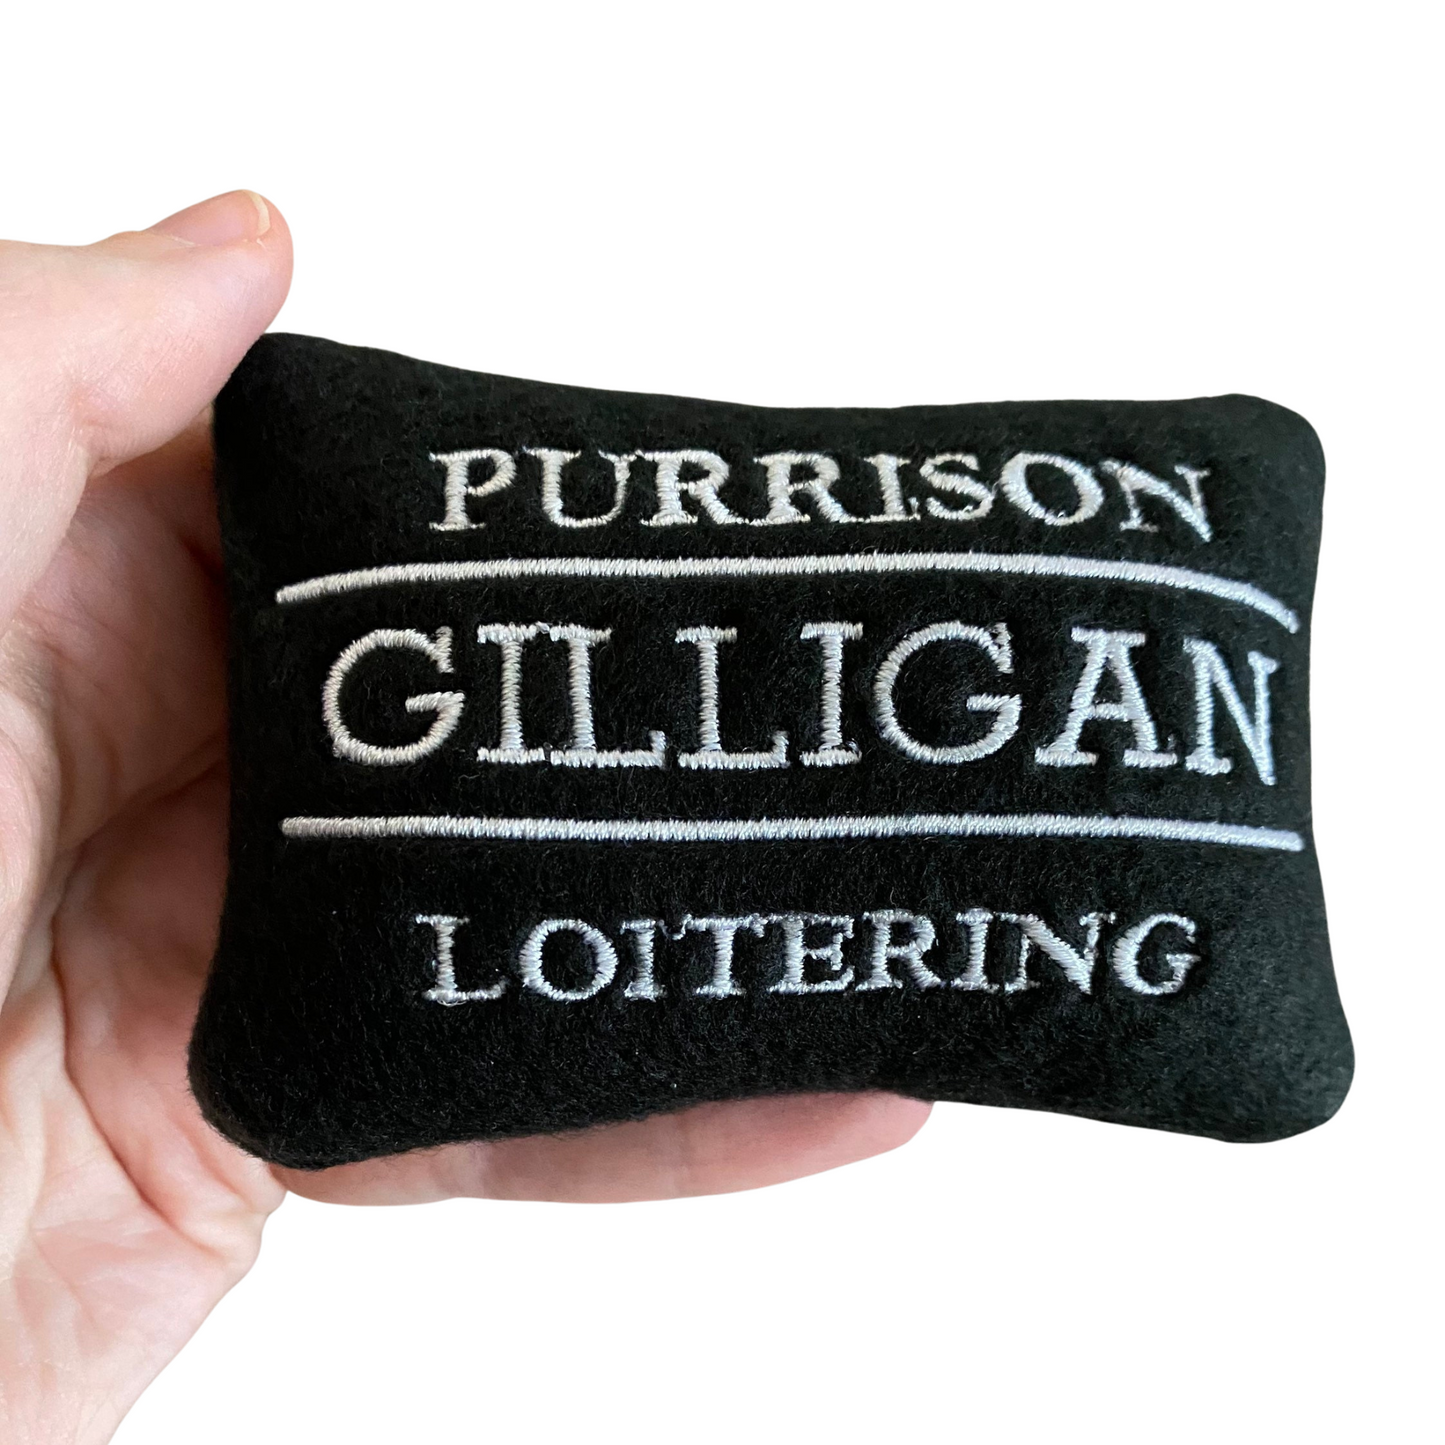 Prison Name Board Custom Cat Toy - Personalized Catnip Toy Cat Toys Loitering  